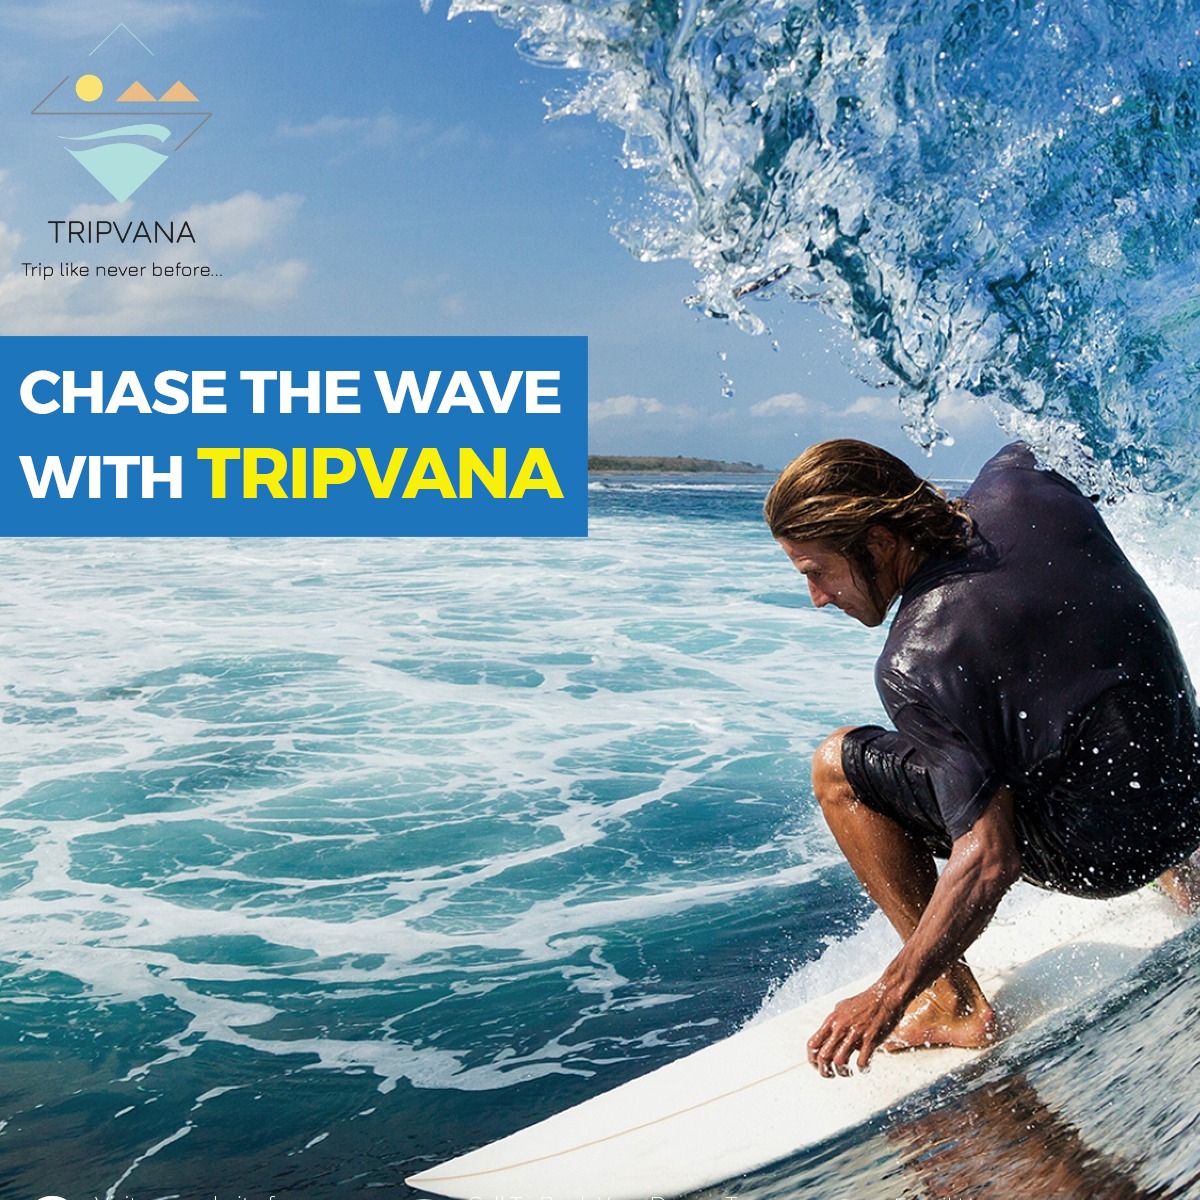 Let your vacation be more adventurous than ever!

#wave #tripvana #wave #holiday #vacation #vacationmode #offbeat #ofbeatplaces #holidayhome #travel #travellife #traveltheworld #Holidays #ecard #flightdeal #flighttickets #flightticketdeals #easyhacks #travelhacks #easytravel